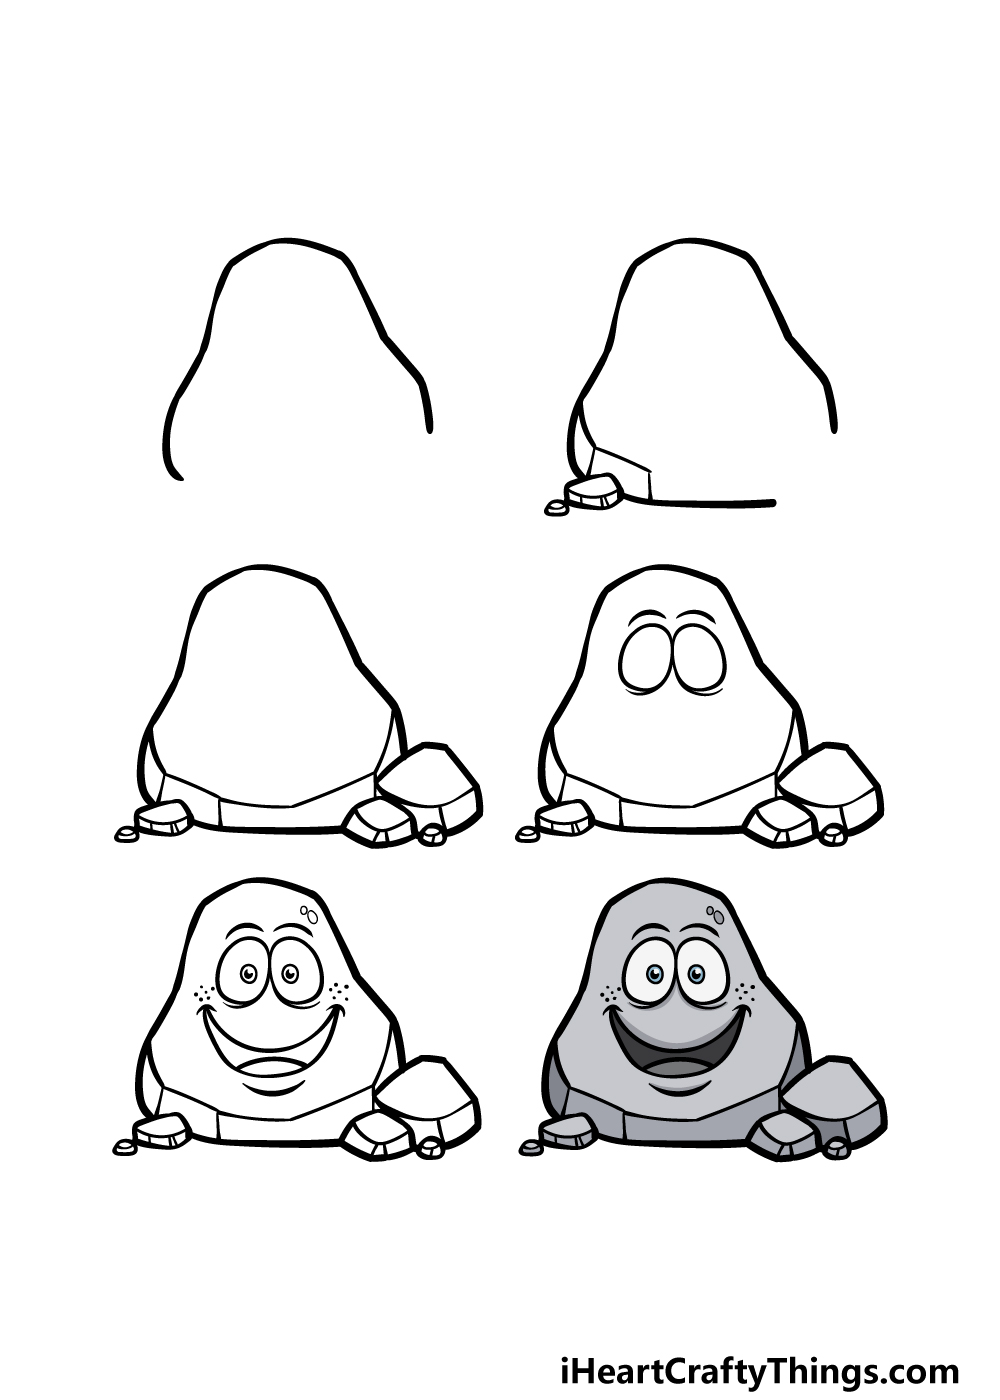 Cartoon Rock Drawing - How To Draw A Cartoon Rock Step By Step